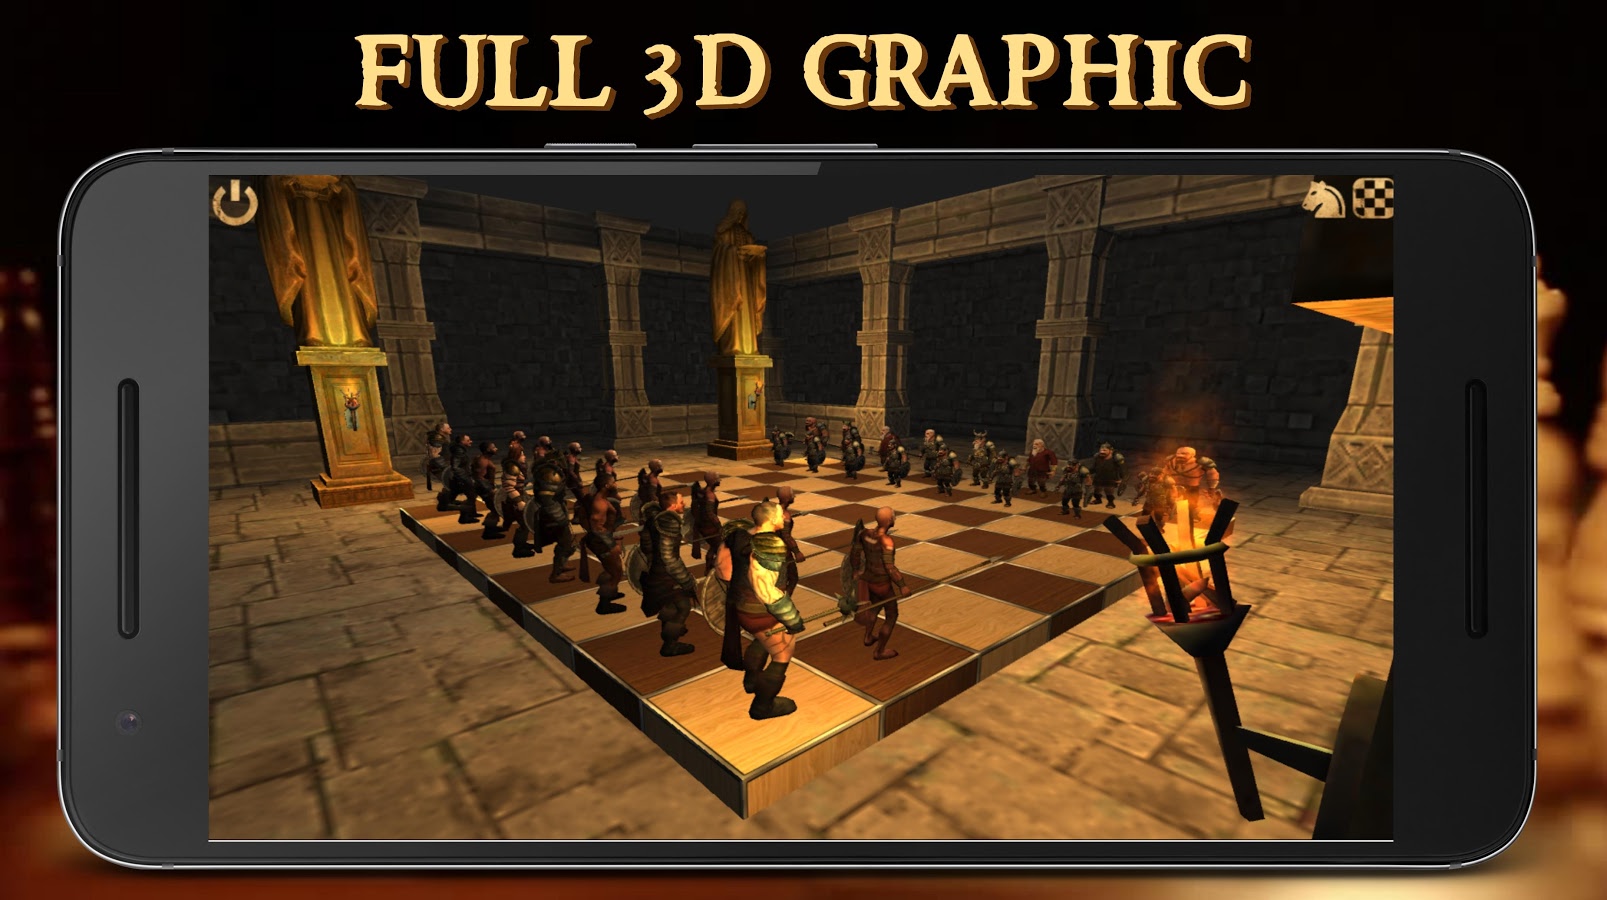 Battle Chess Games For Pc - generouspal